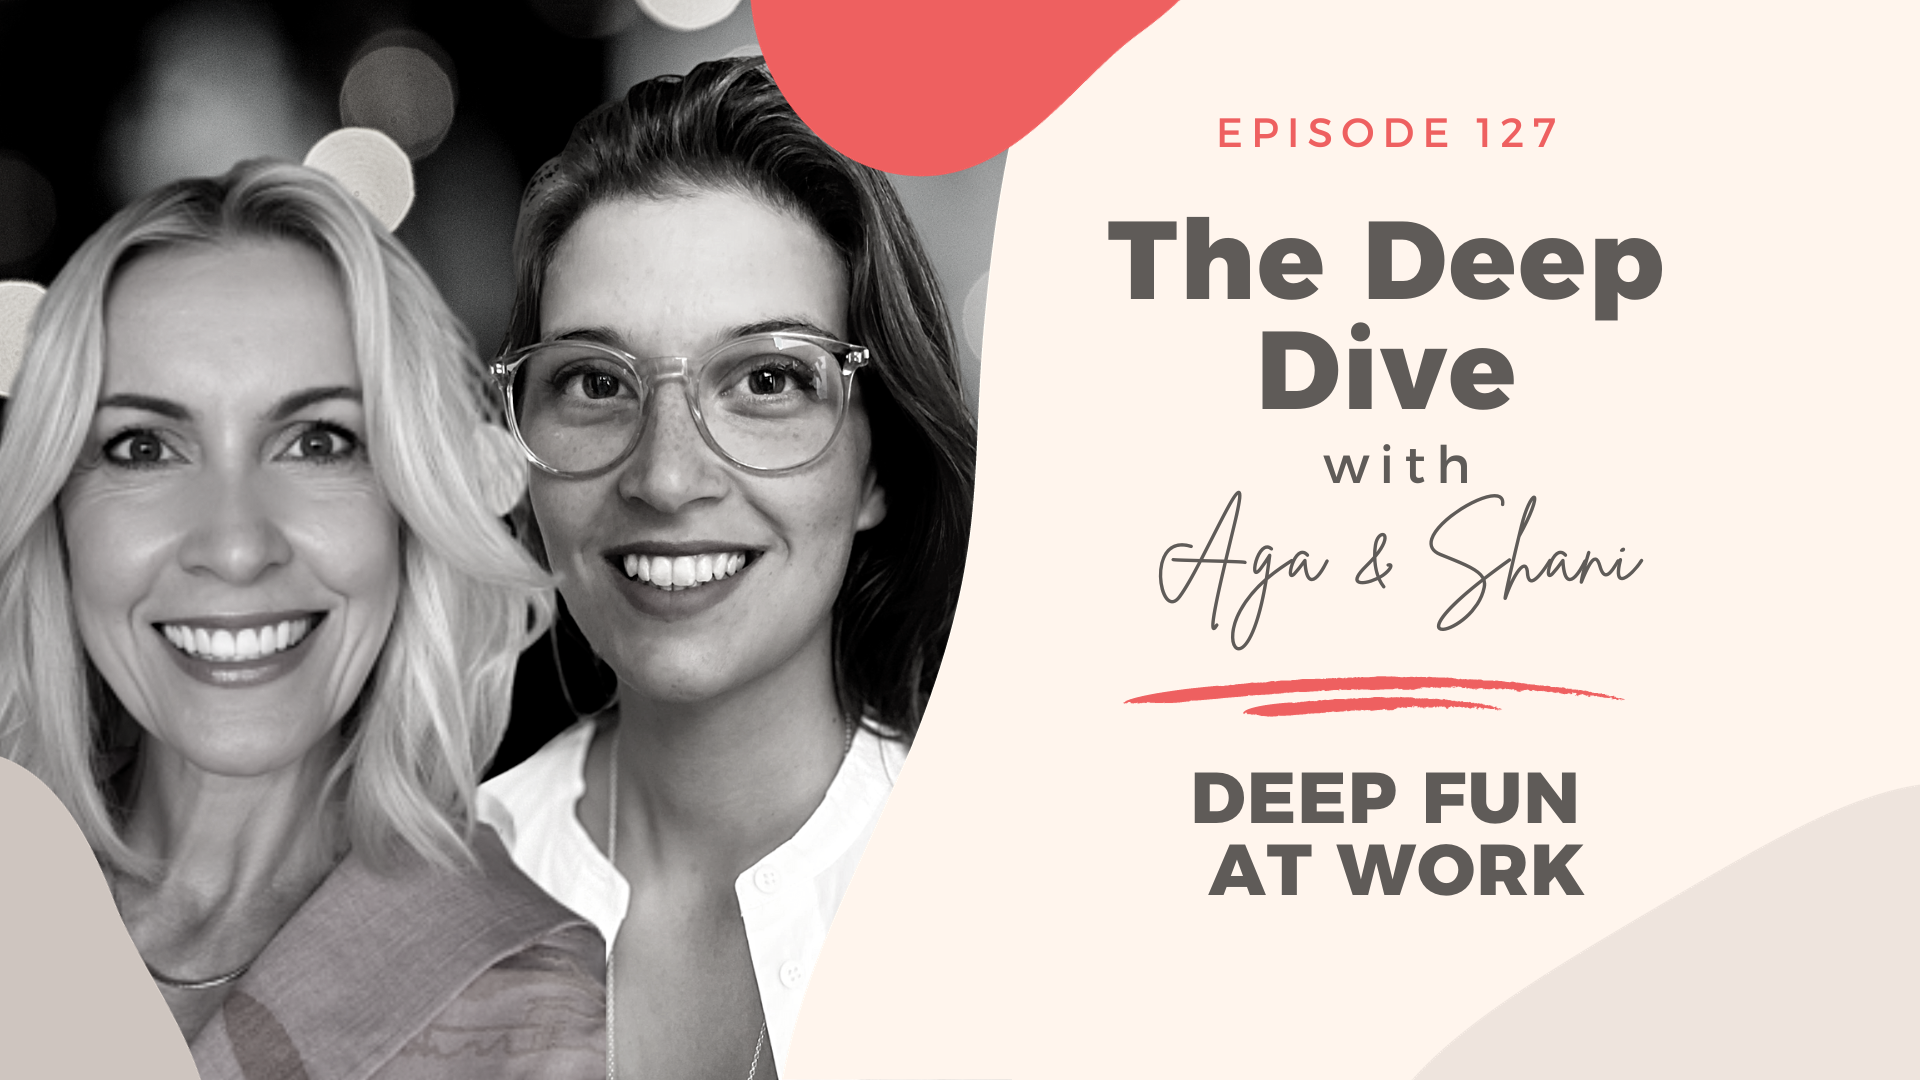 The Deep Dive with Aga and Shani